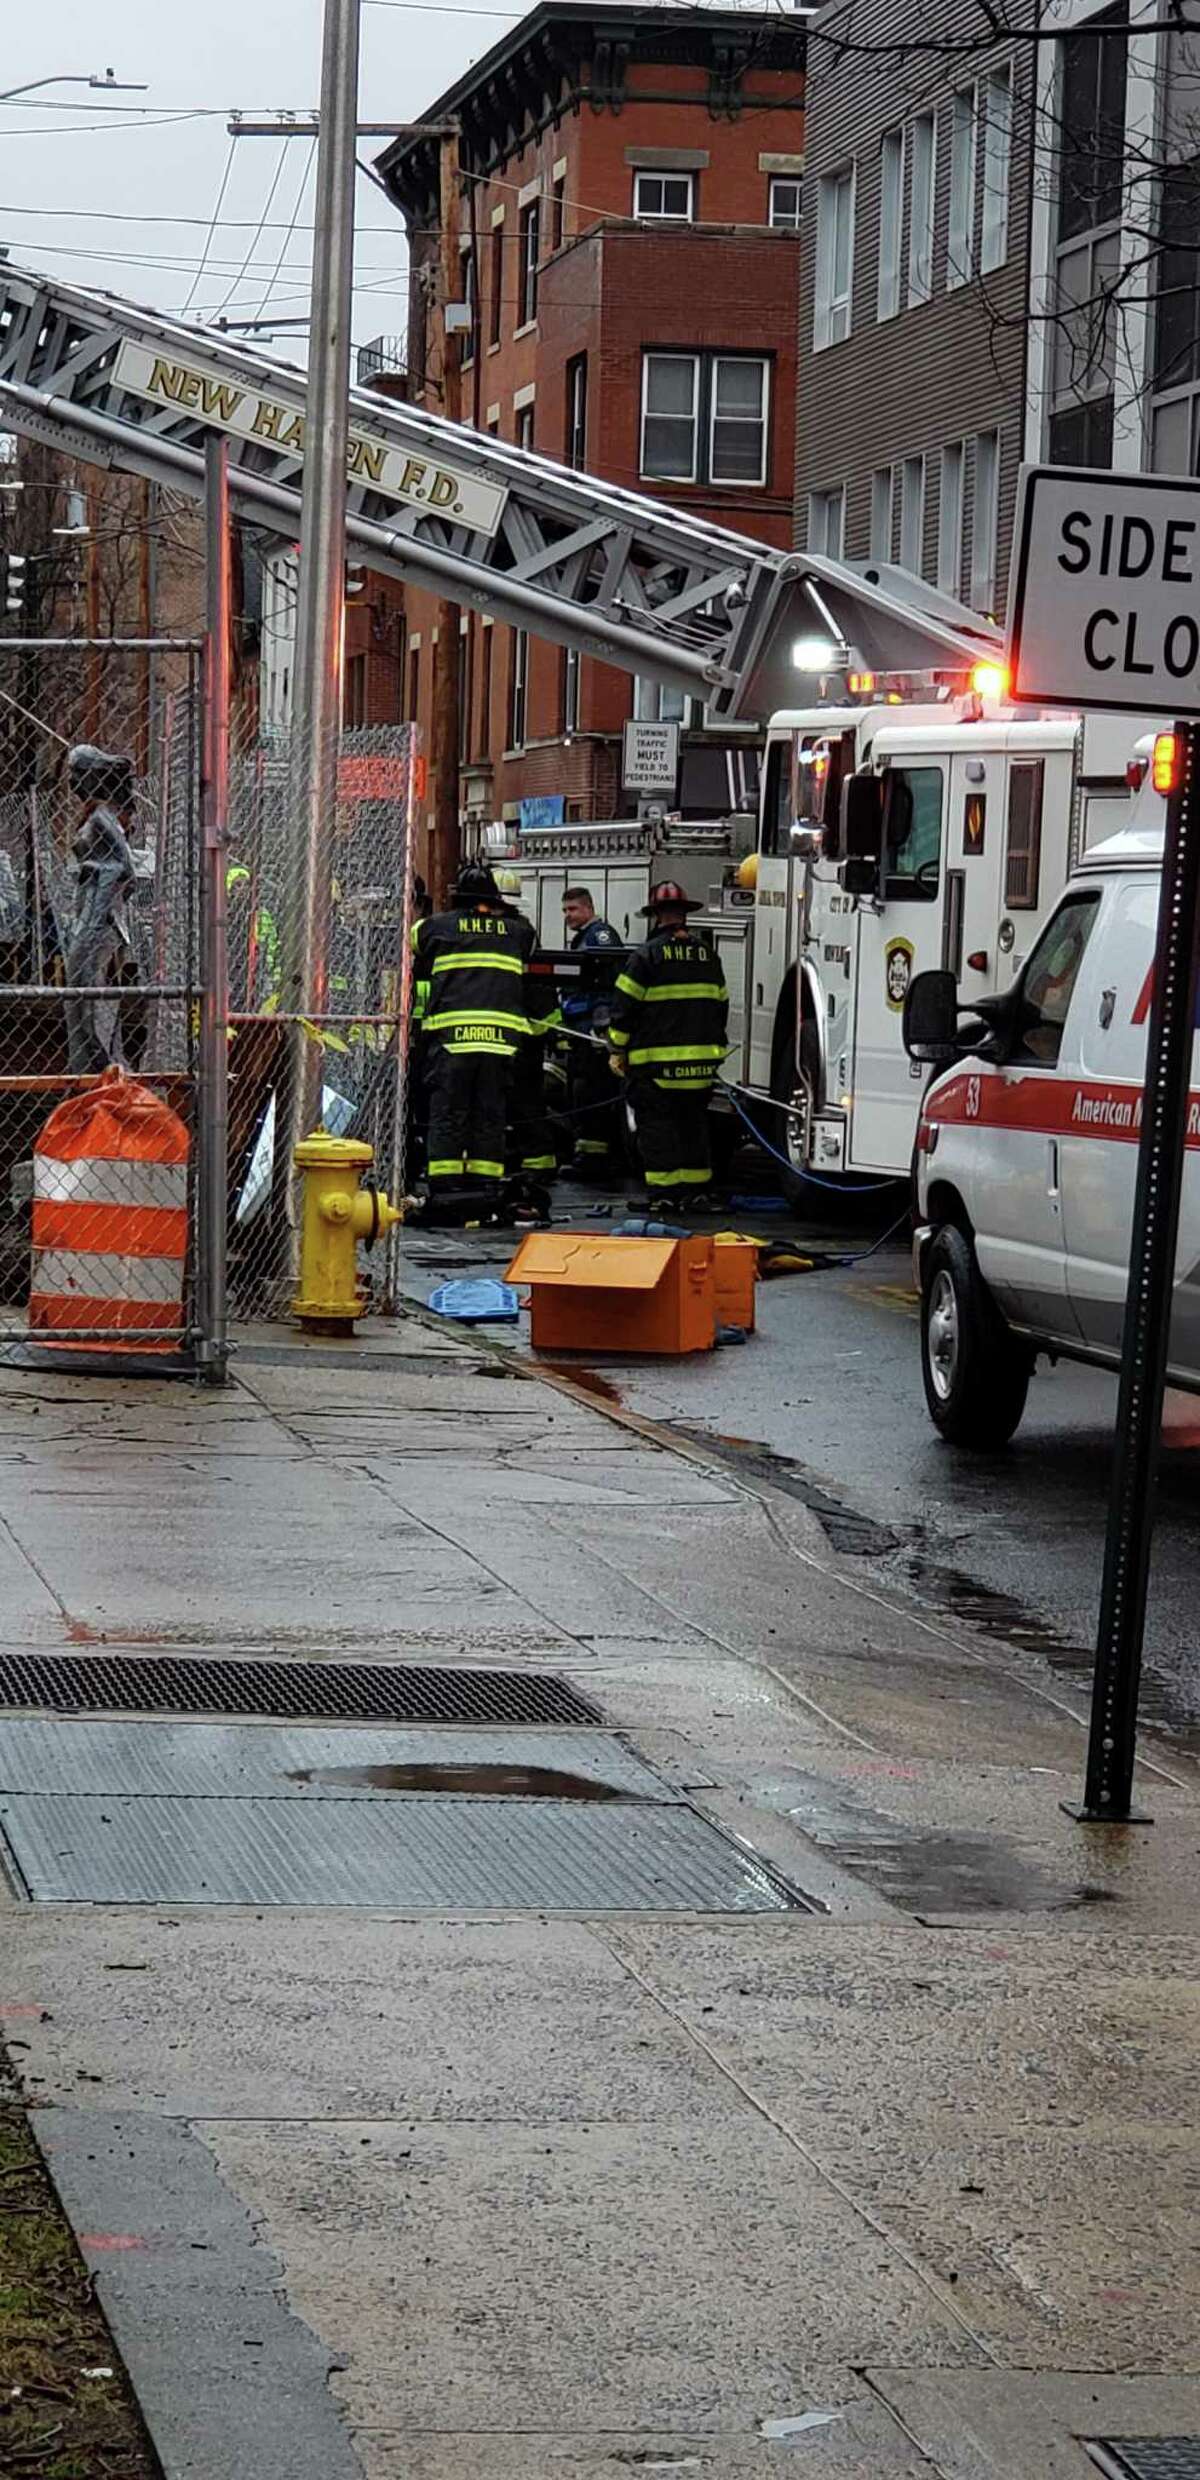 Firefighters responded to the scene of an accident at a High Street construction site on Monday, Dec. 30, 2019. The New Haven Fire Department is at the scene of a construction accident at 18 High St., said Rick Fontana, director of emergency operations.